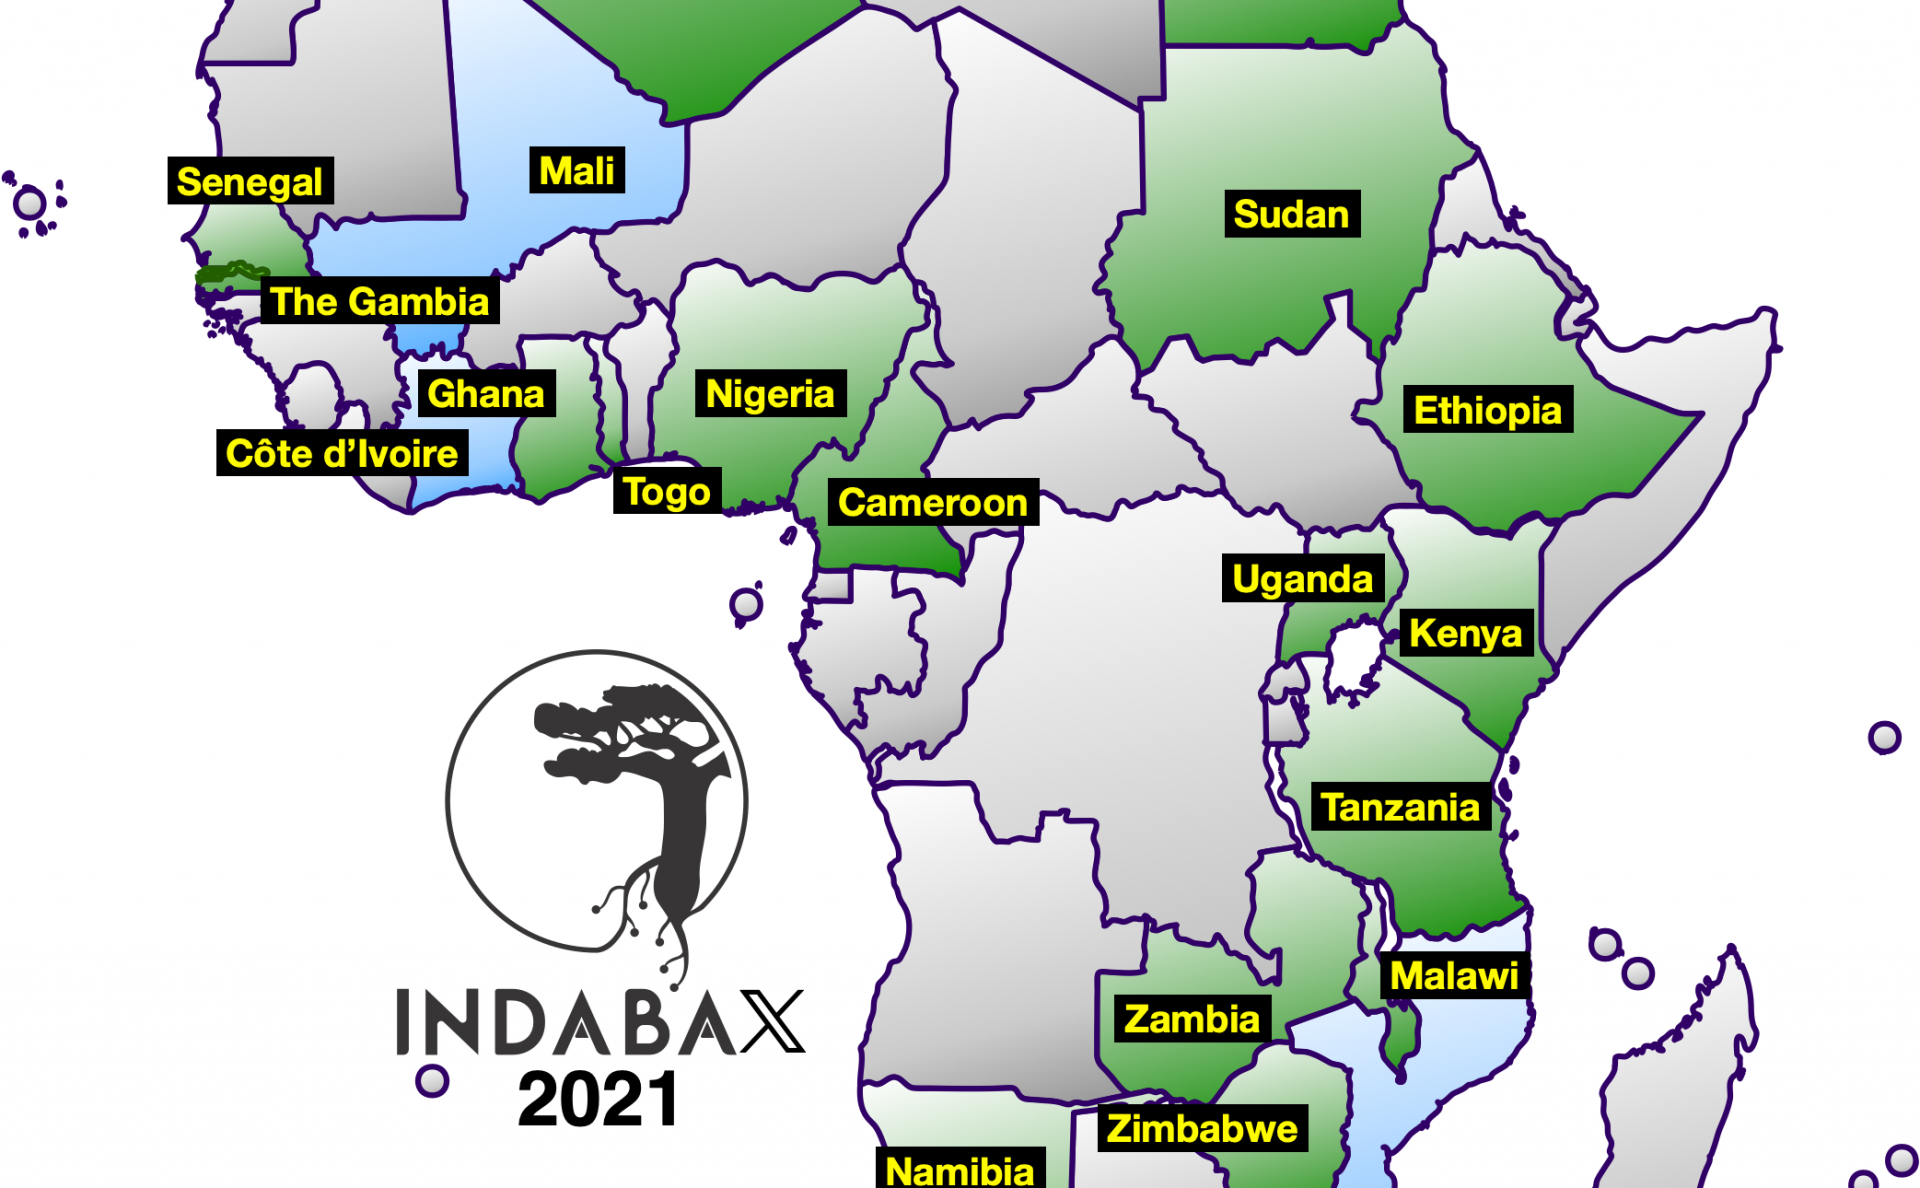 24 IndabaX 2021 Host Countries